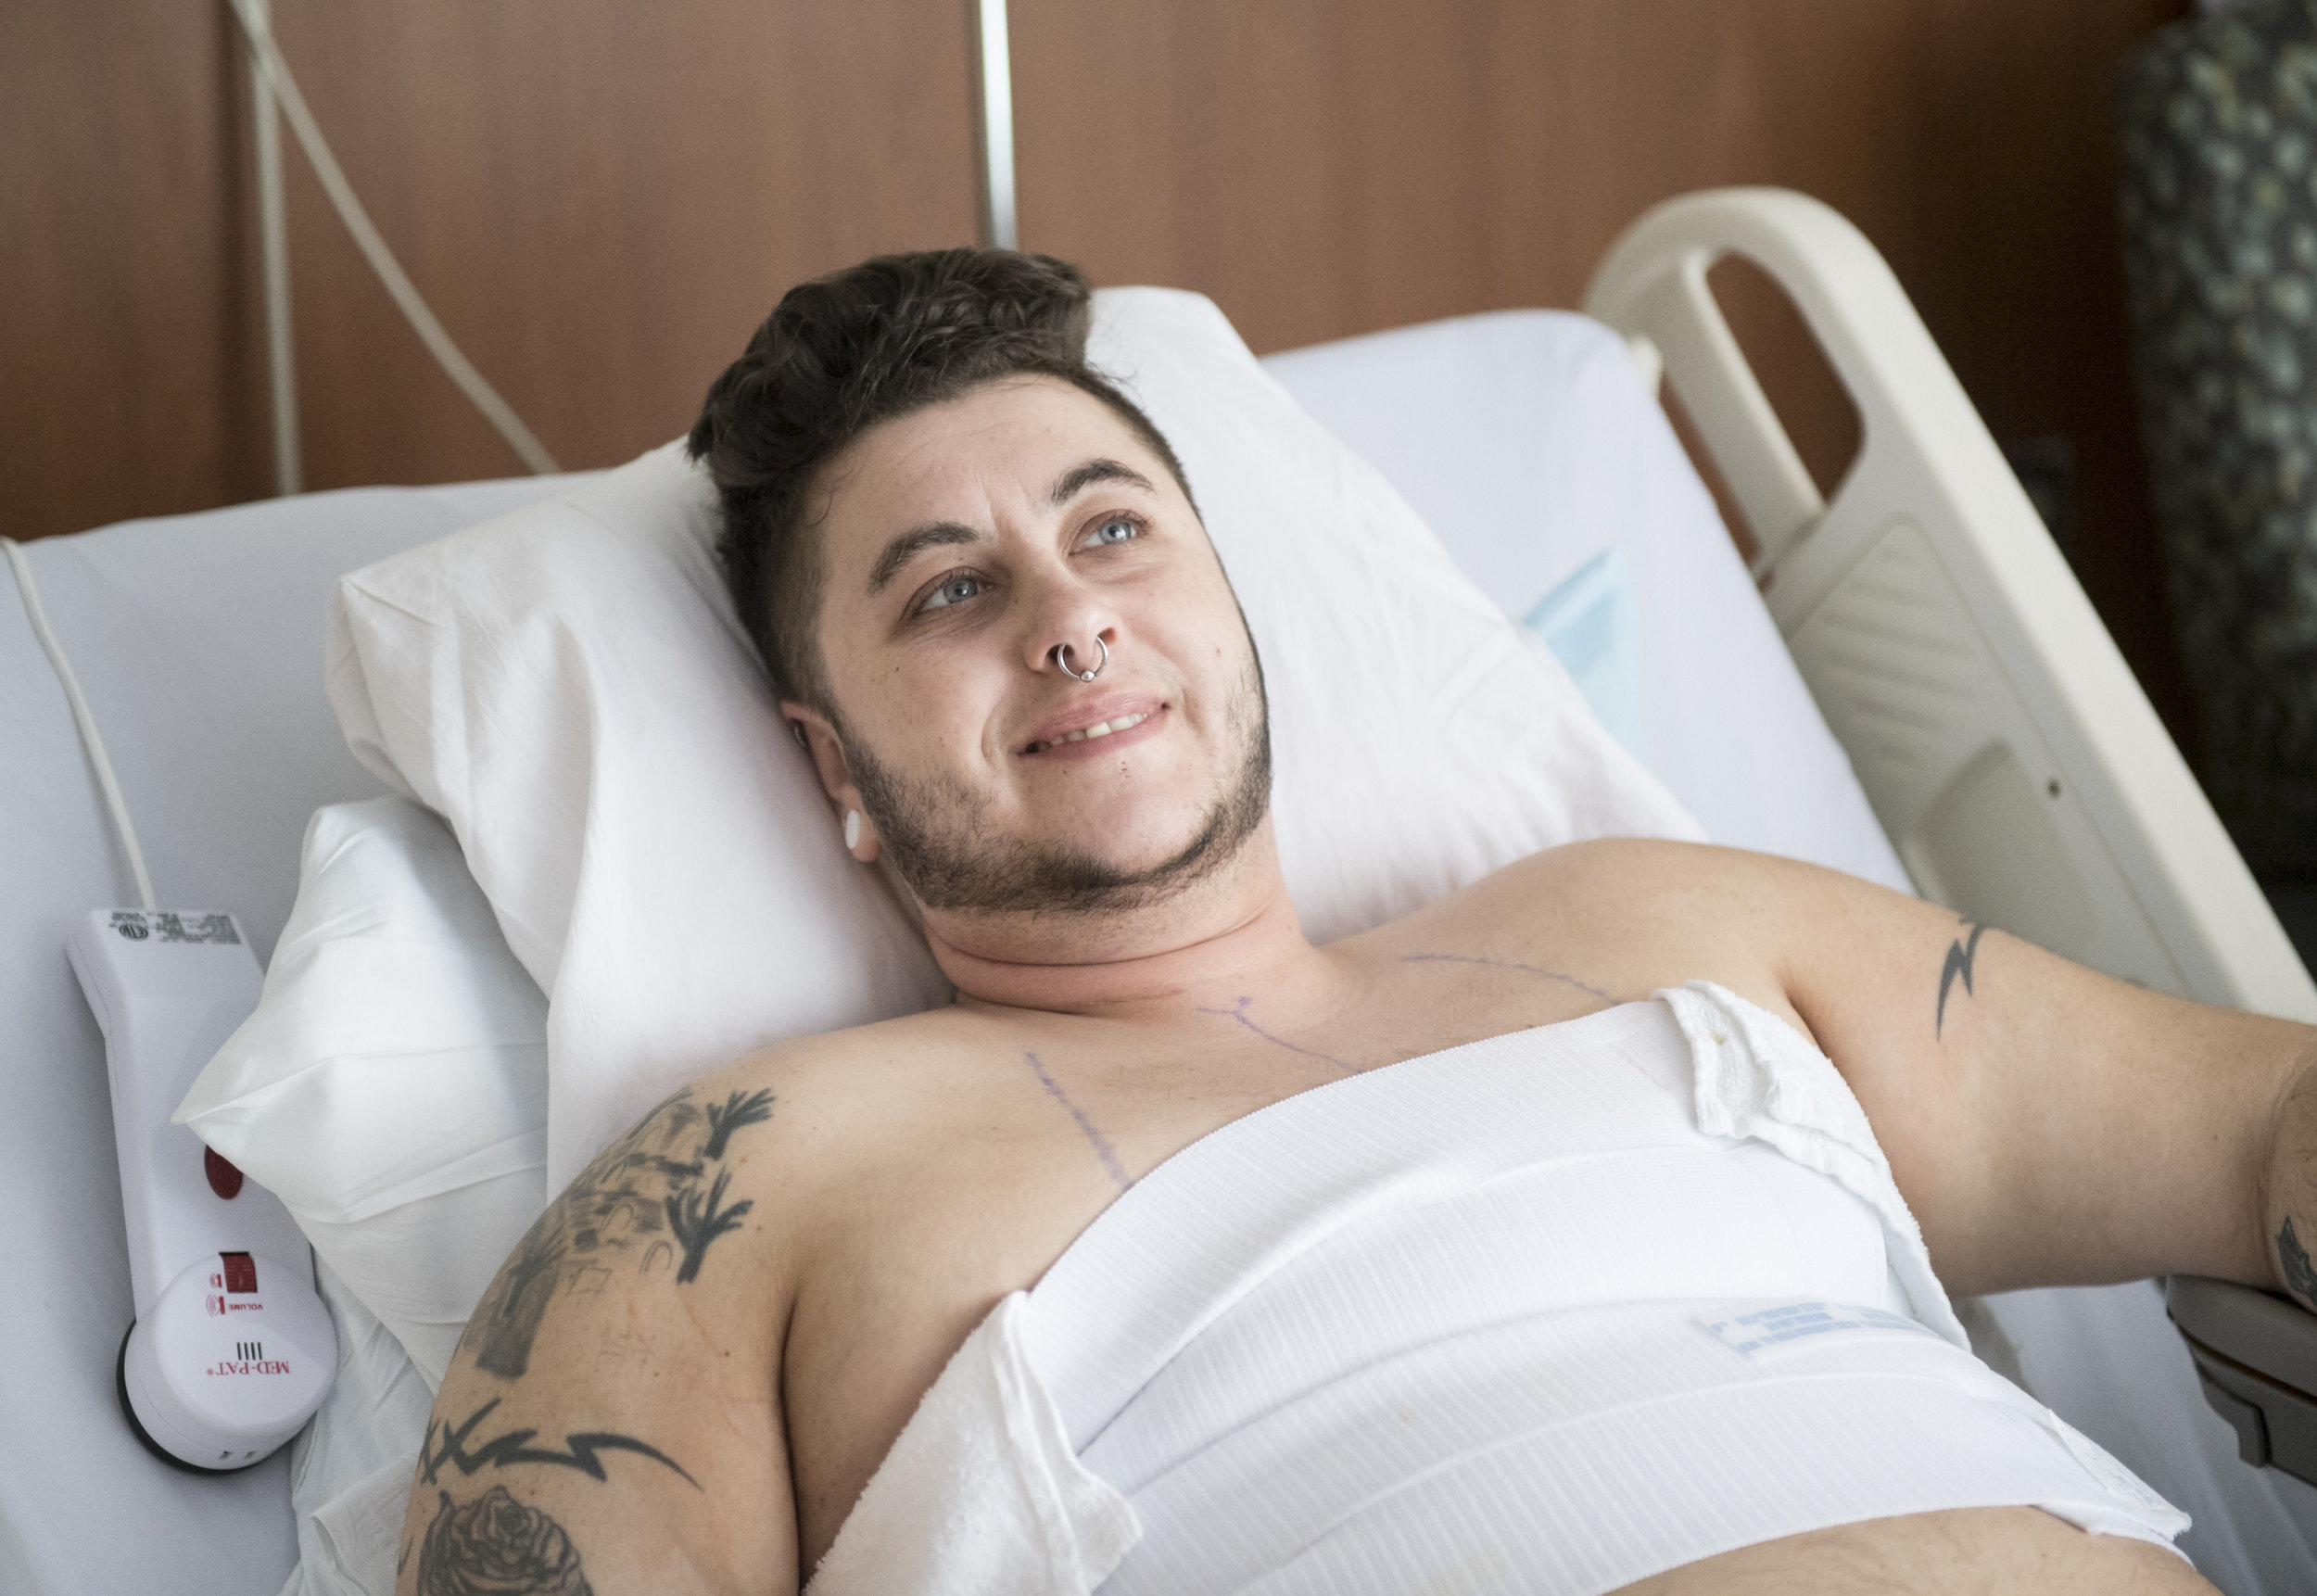  Beau felt transformed after his surgery. “I don’t even have words for it,” he said. “I can definitely say my insides are matching my outsides more and more.” 